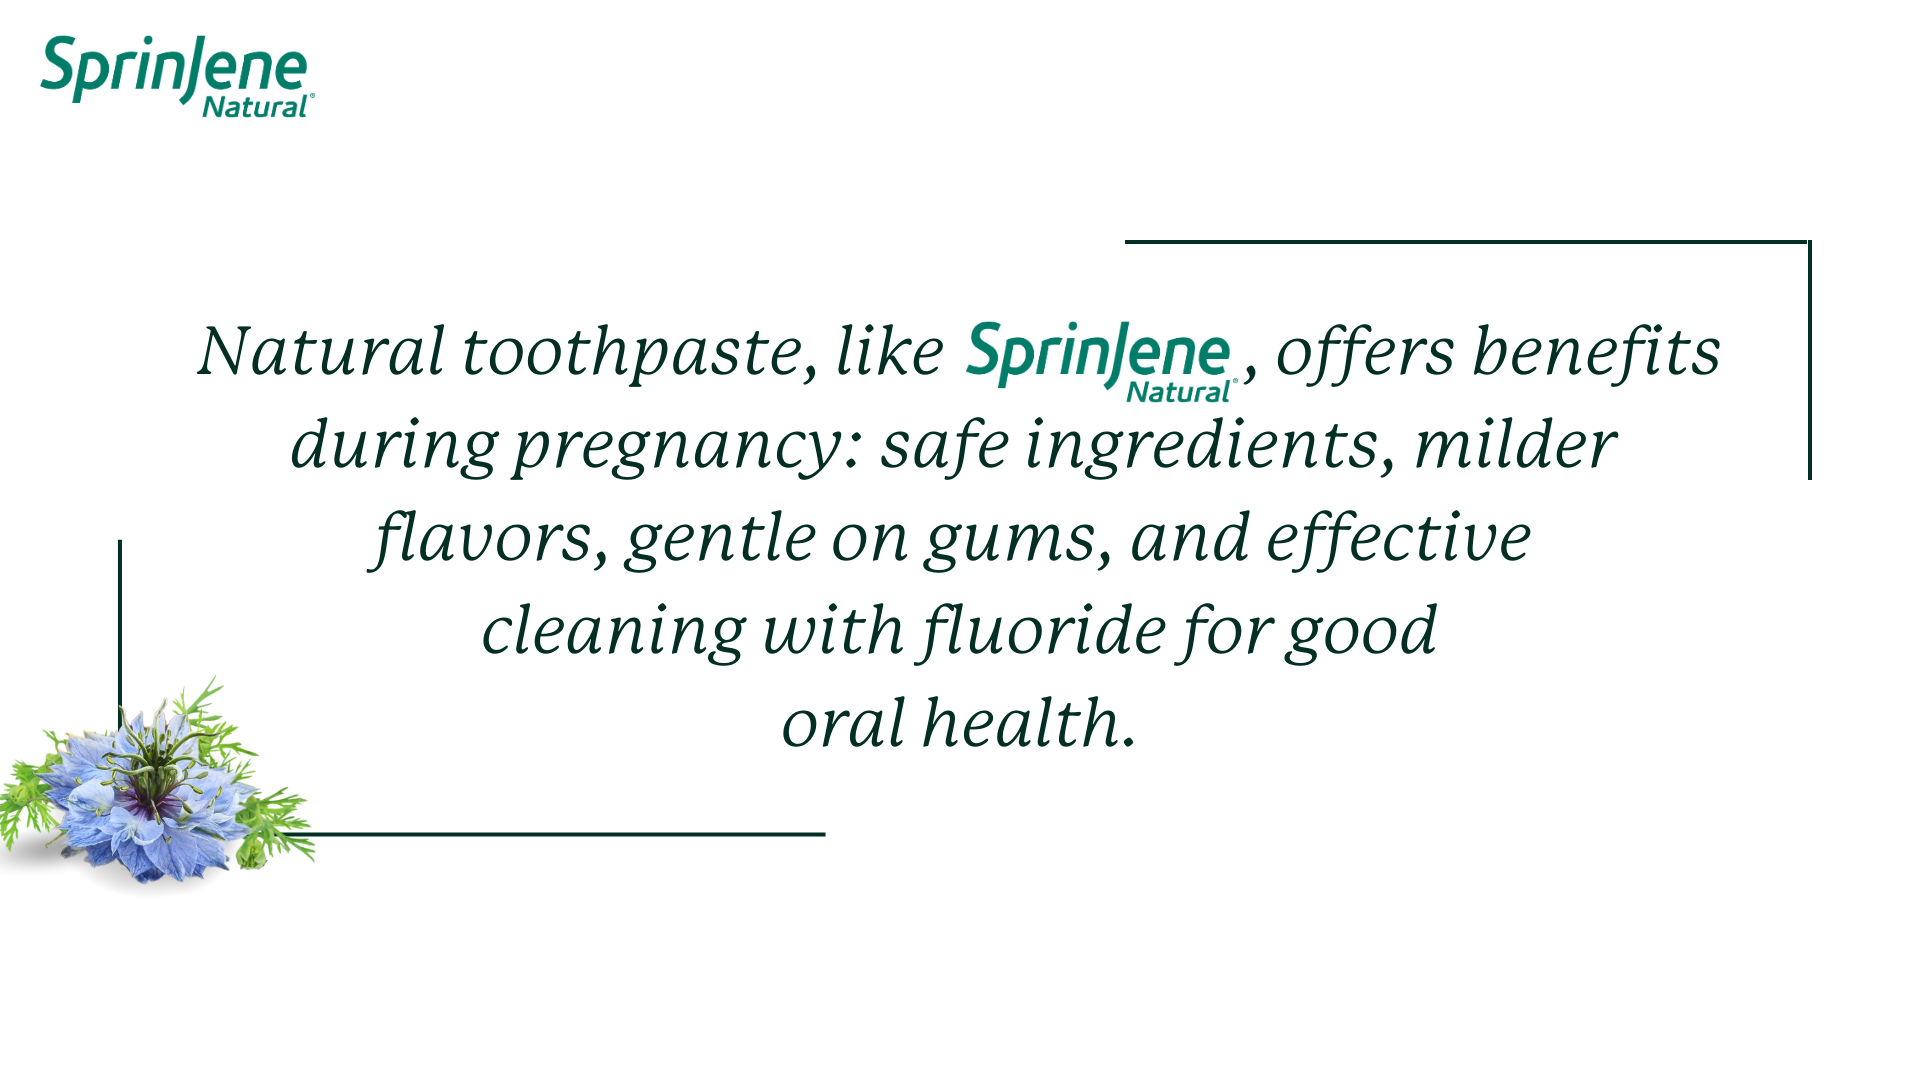 Natural toothpaste, like SprinJene Natural, offers benefits during pregnancy: safe ingredients, milder flavors, gentle on gums, and effective  cleaning with fluoride for good oral health.